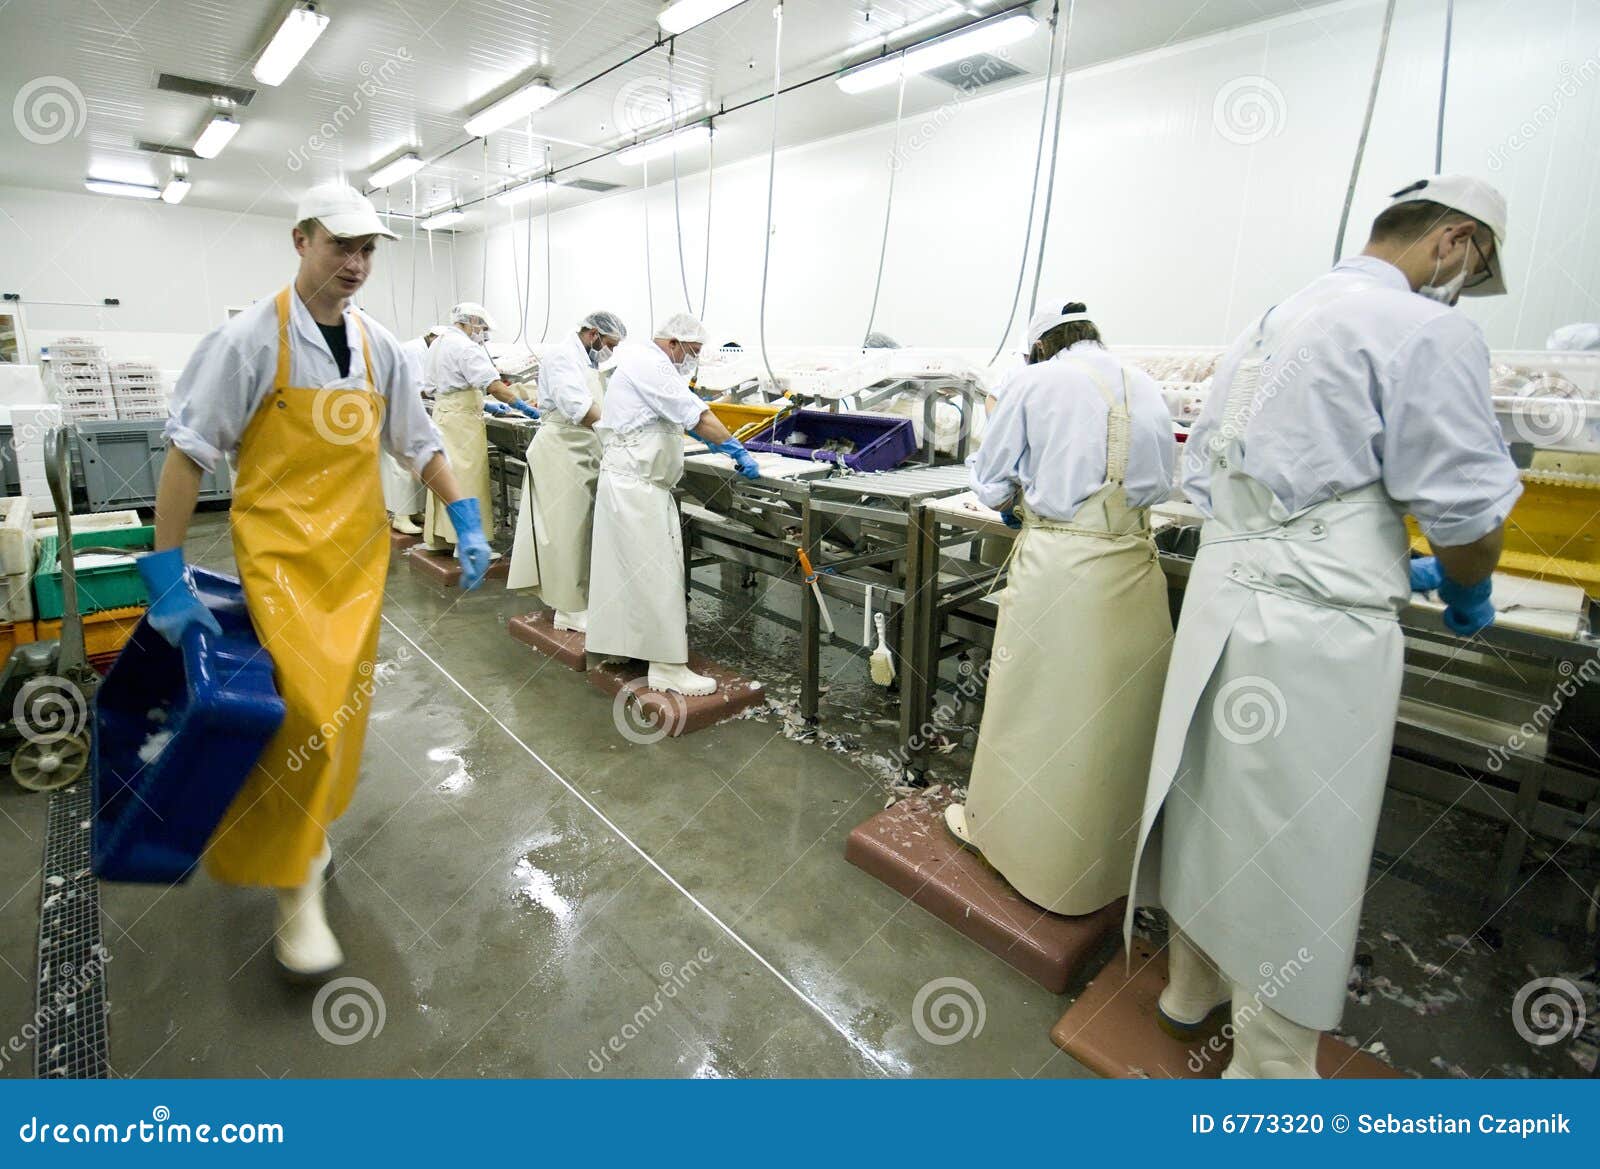 fish manufacture workers